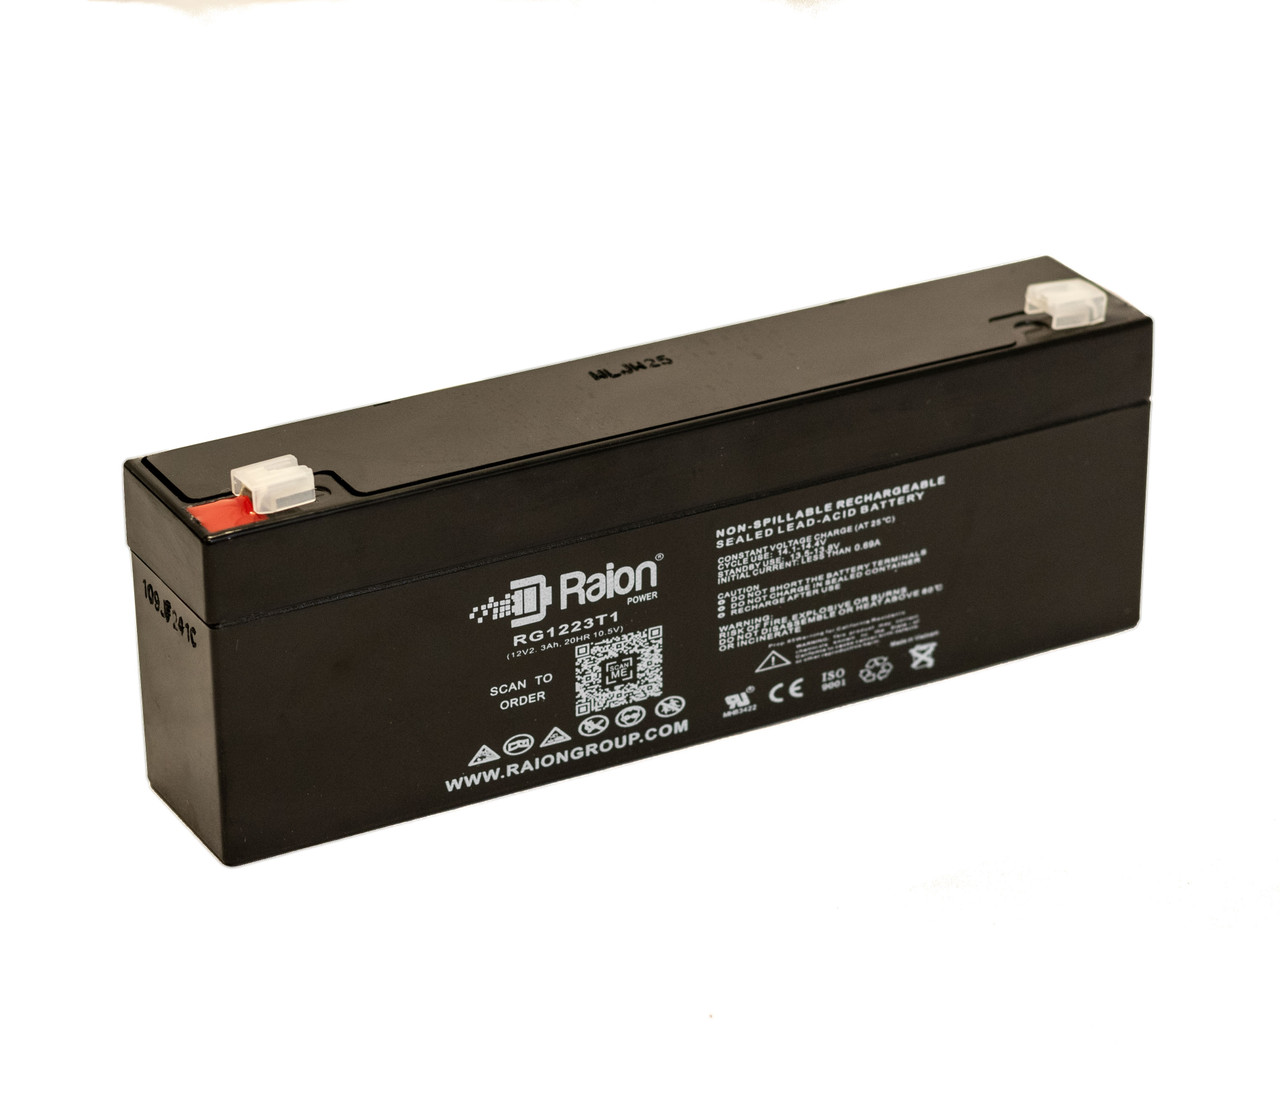 Raion Power RG1223T1 Replacement Battery for B Braun 300